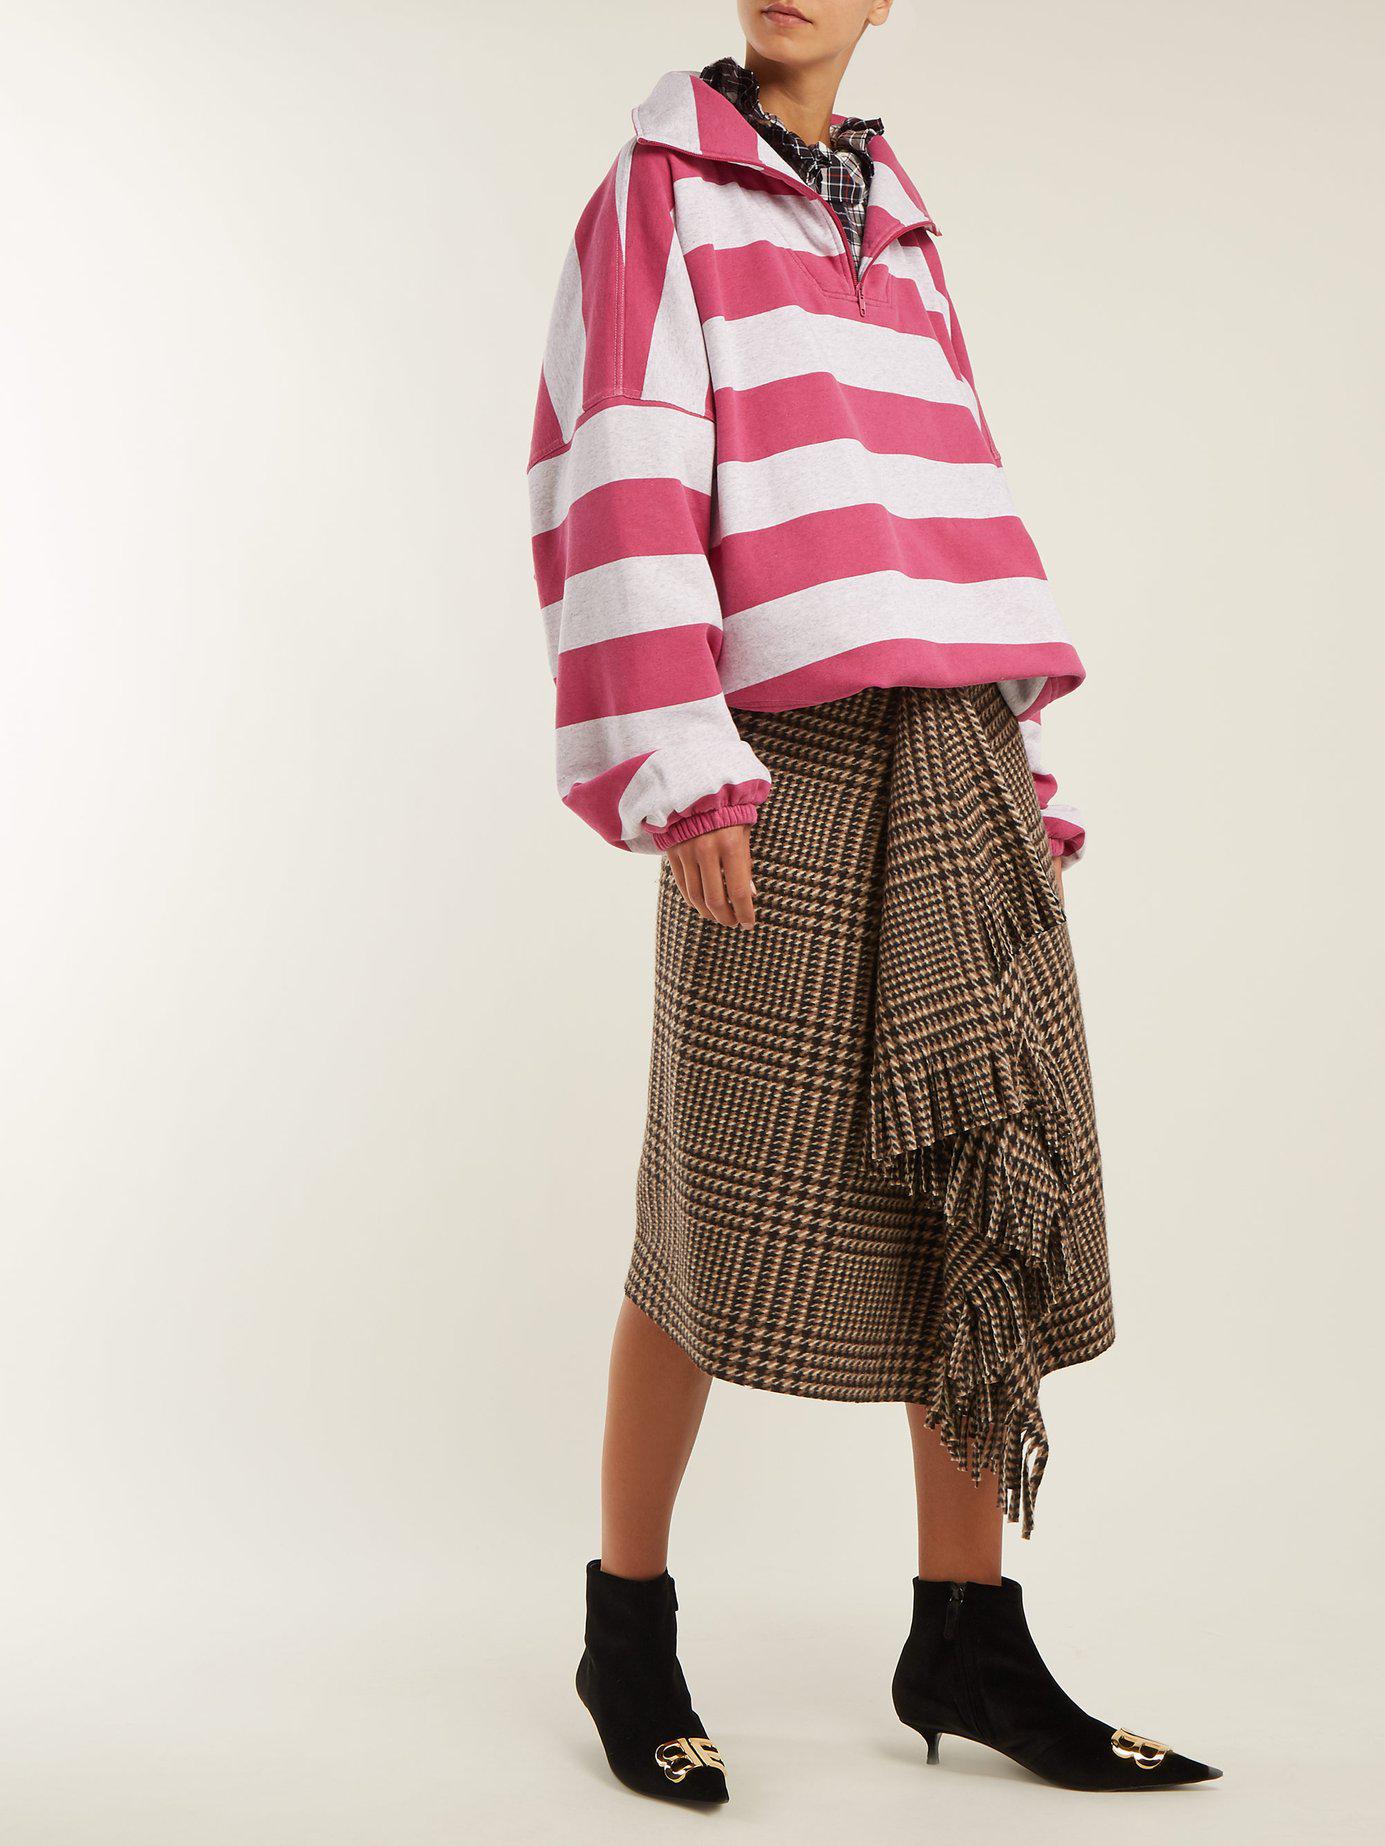 Balenciaga Striped Cotton-blend Top in Pink | Lyst